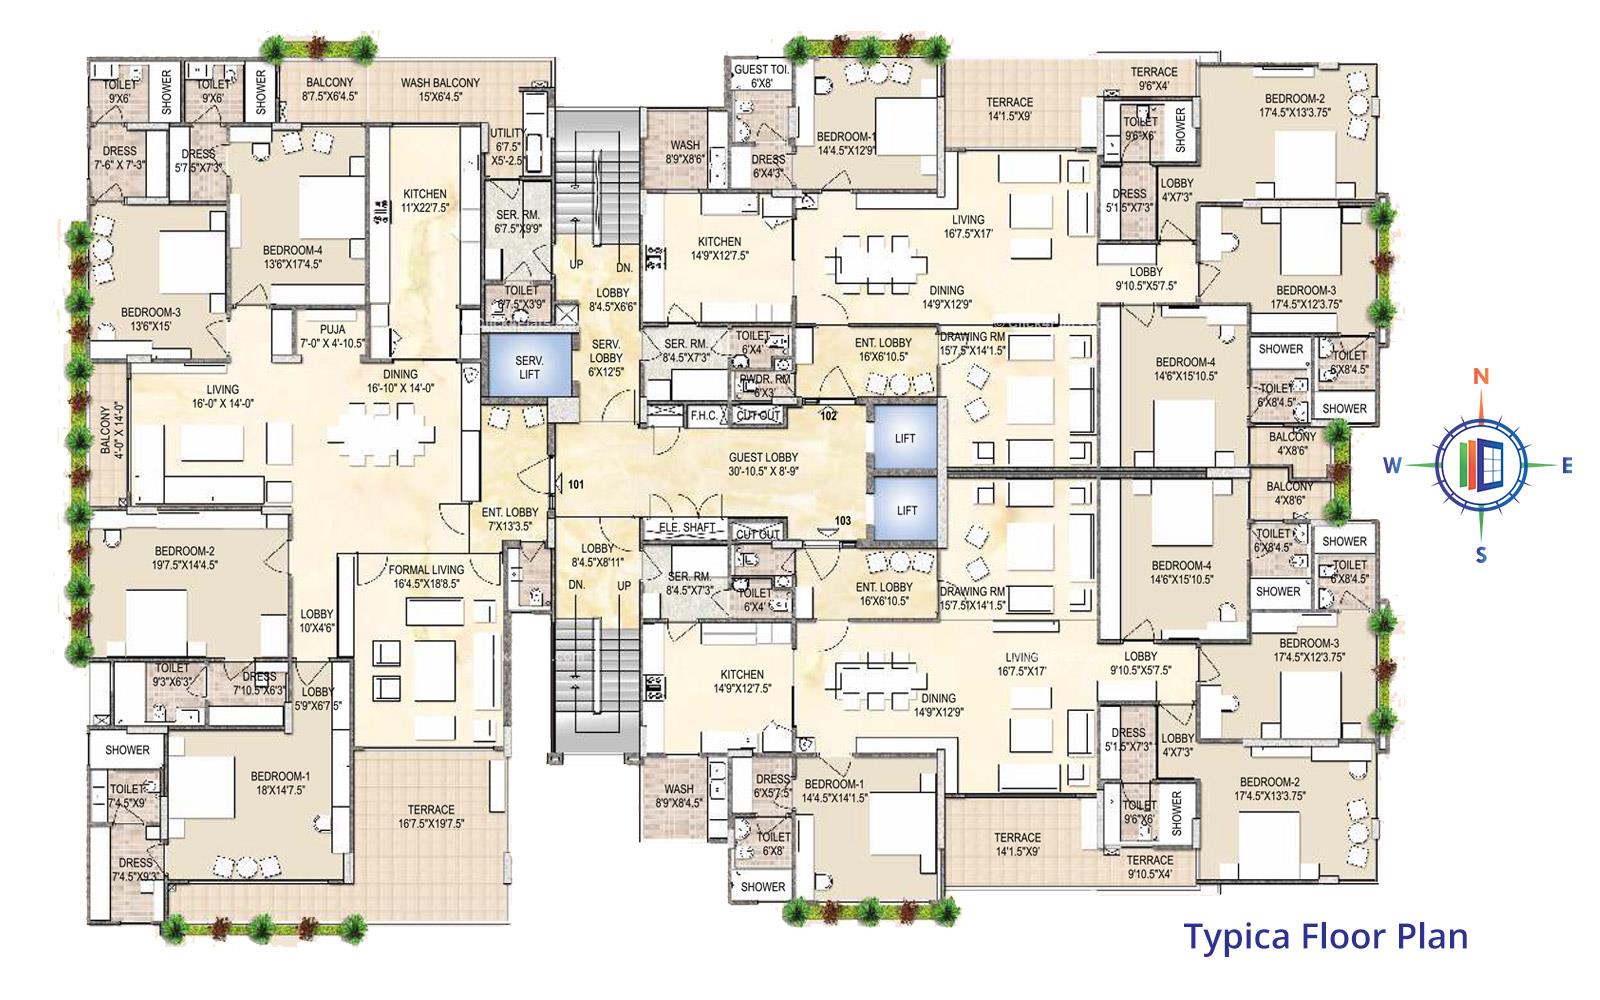 The Address Typical Floor Plan